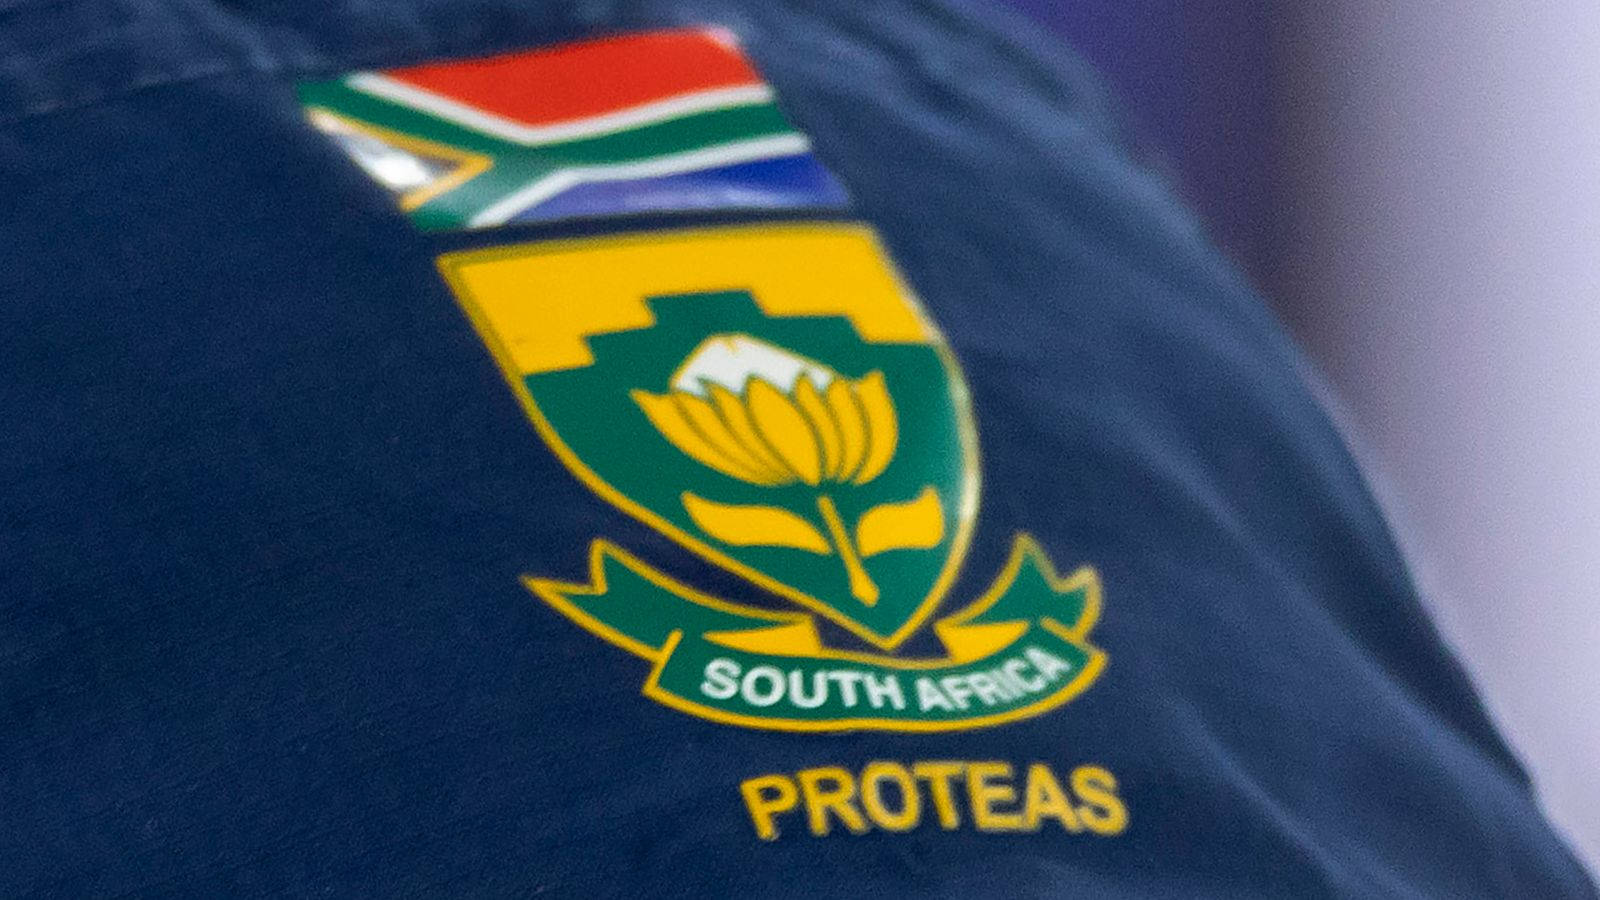 South Africa Cricket Logo In Shirt